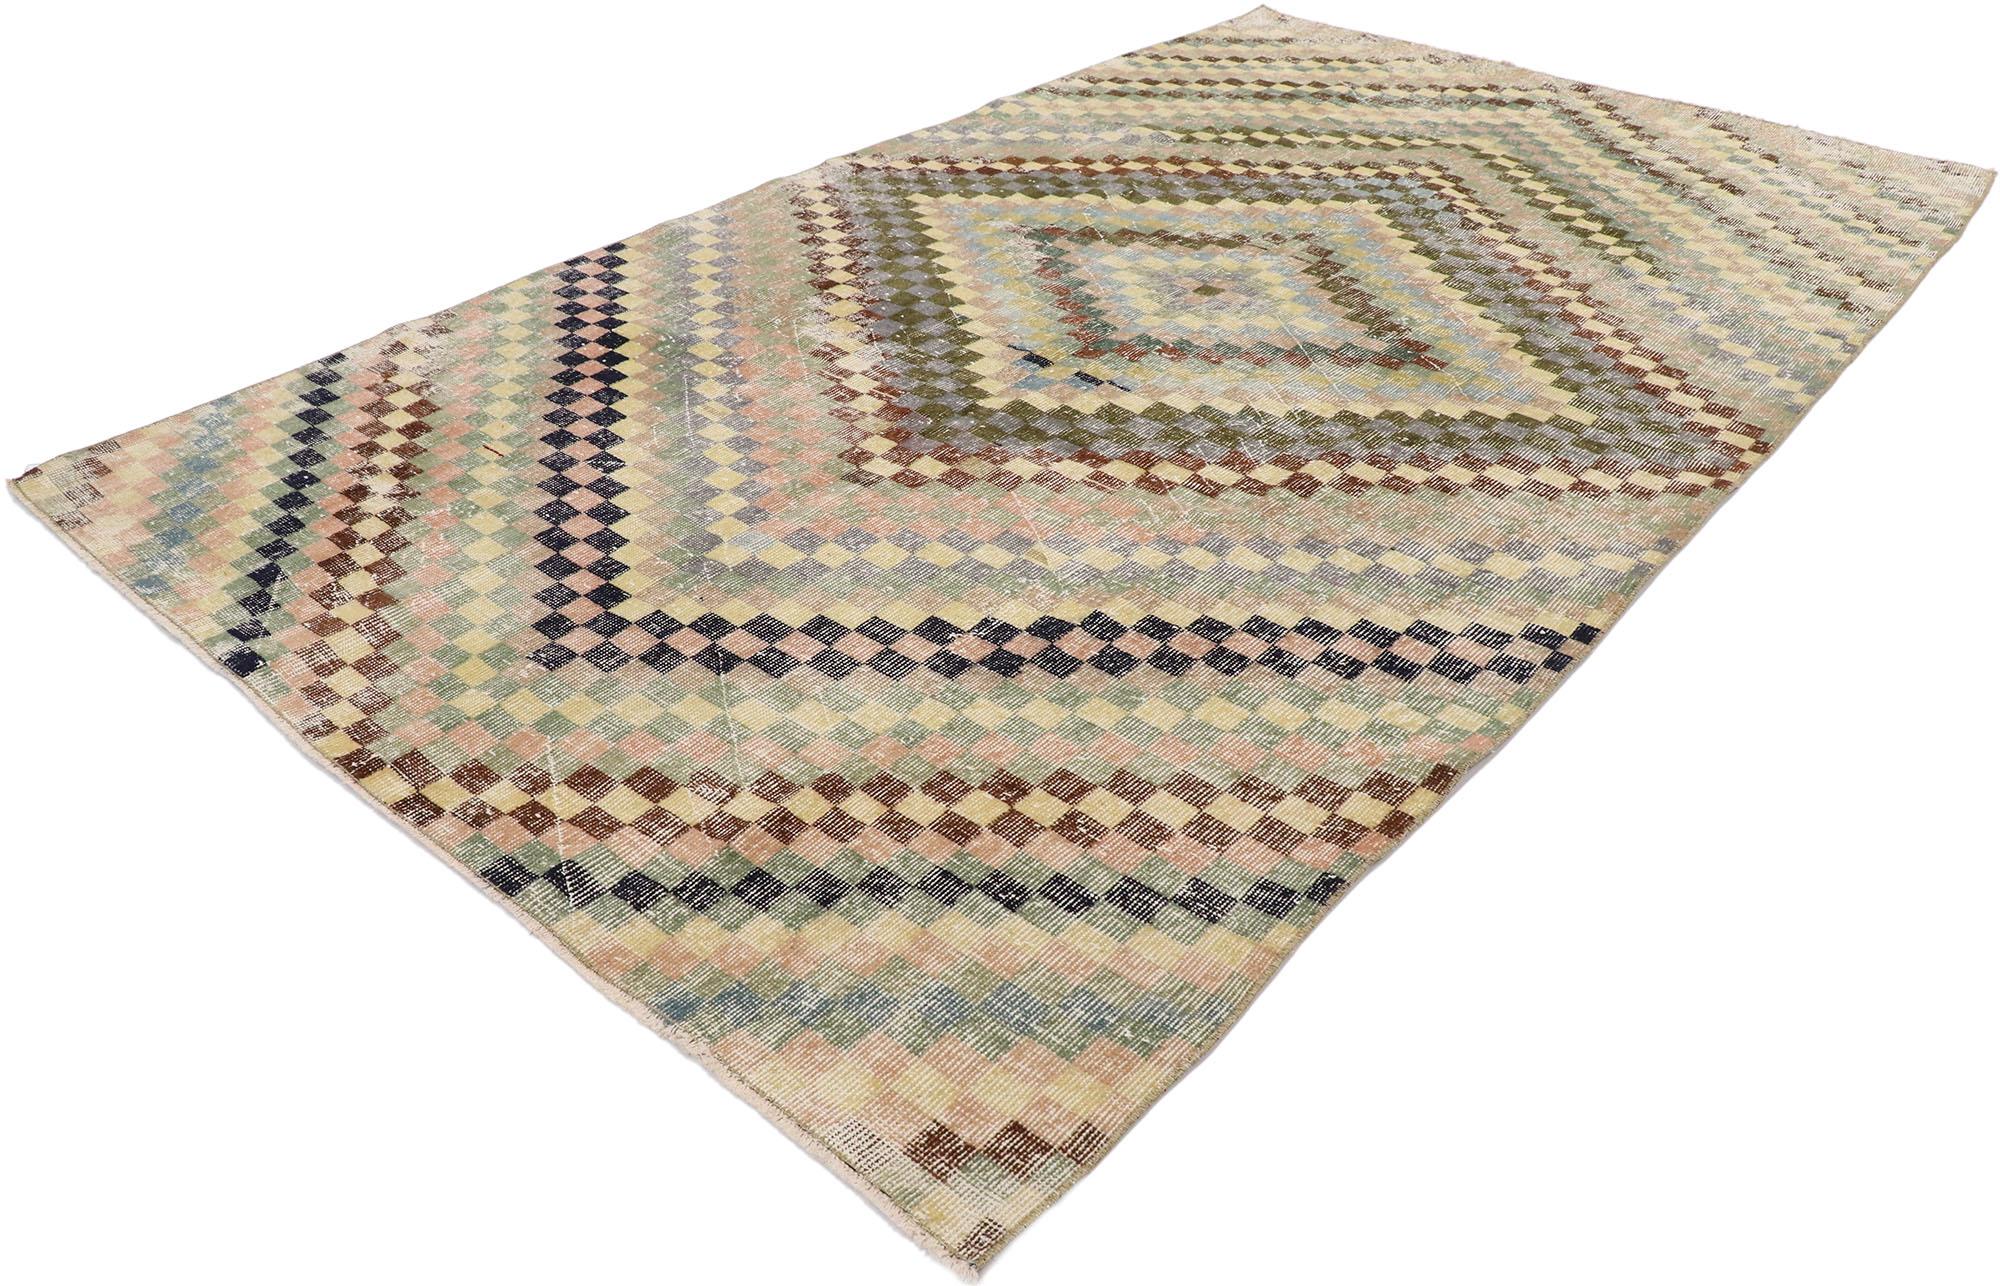 53278, distressed vintage Turkish Sivas rug with Modern Cubist style. This hand knotted wool distressed vintage Turkish Sivas rug features an all-over checkered pattern comprised of rows of multi-colored squares. Color-blocked concentric diamonds